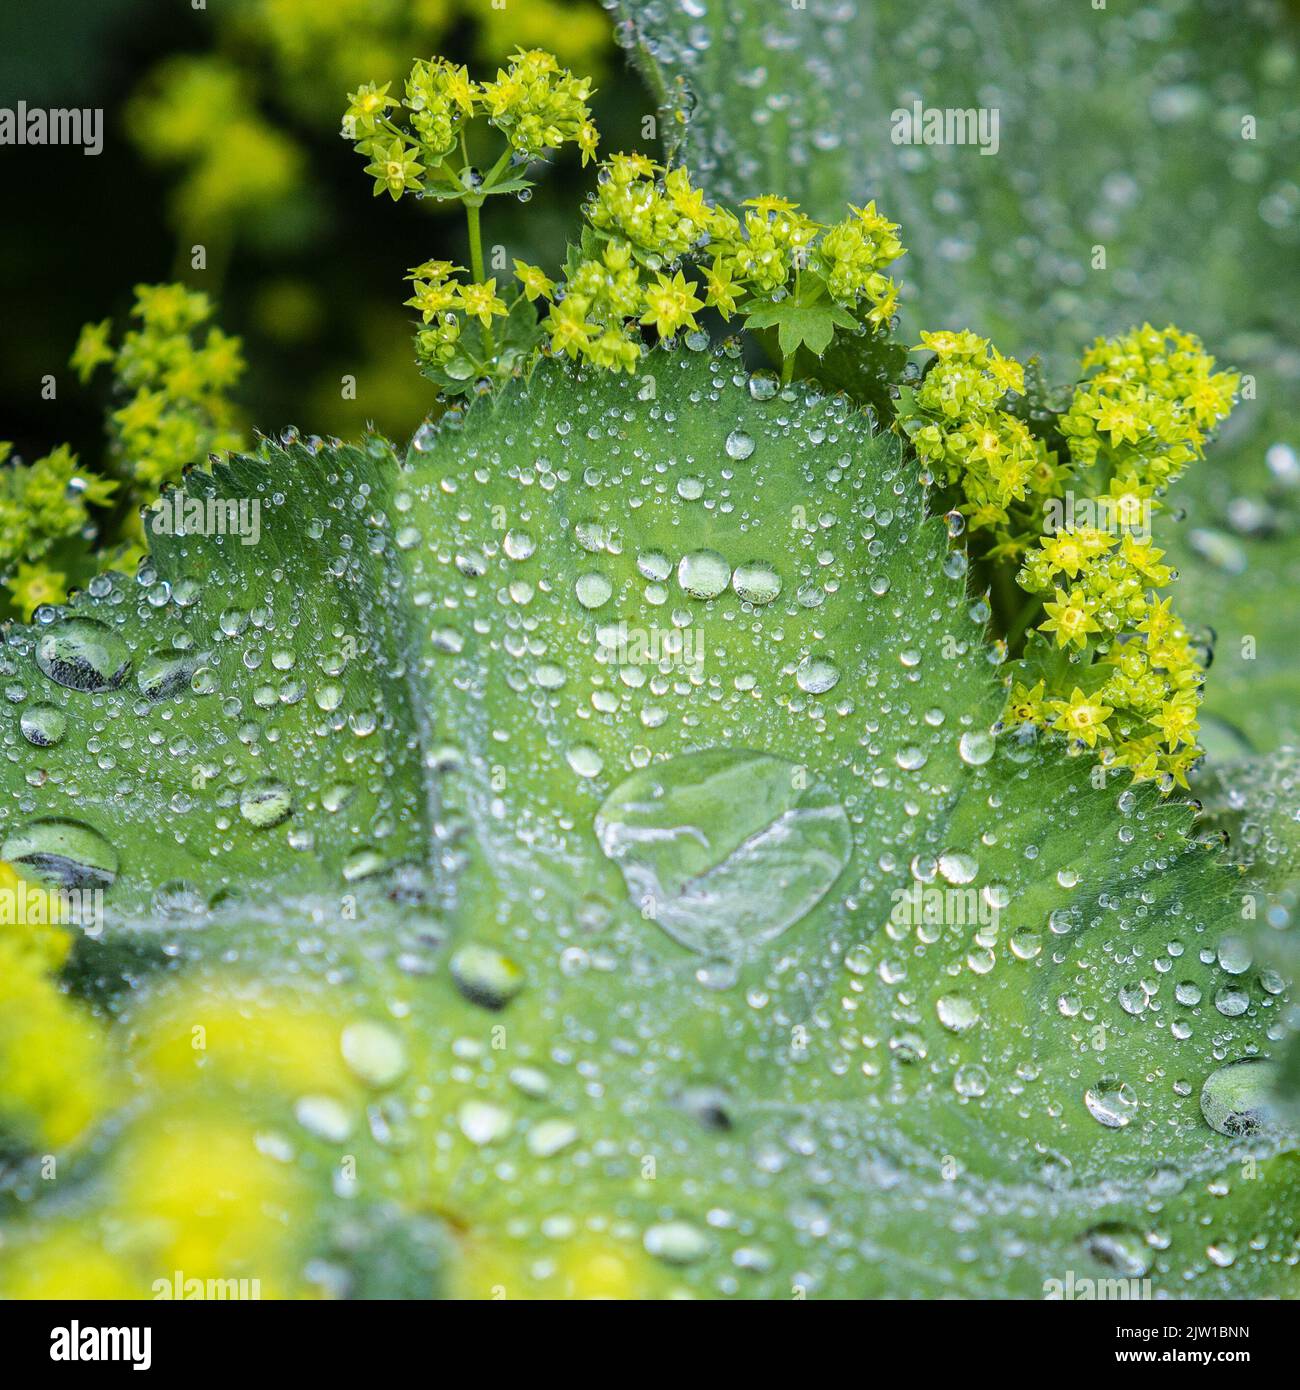 The rain drops on a Lady's Mantle leaf Stock Photo